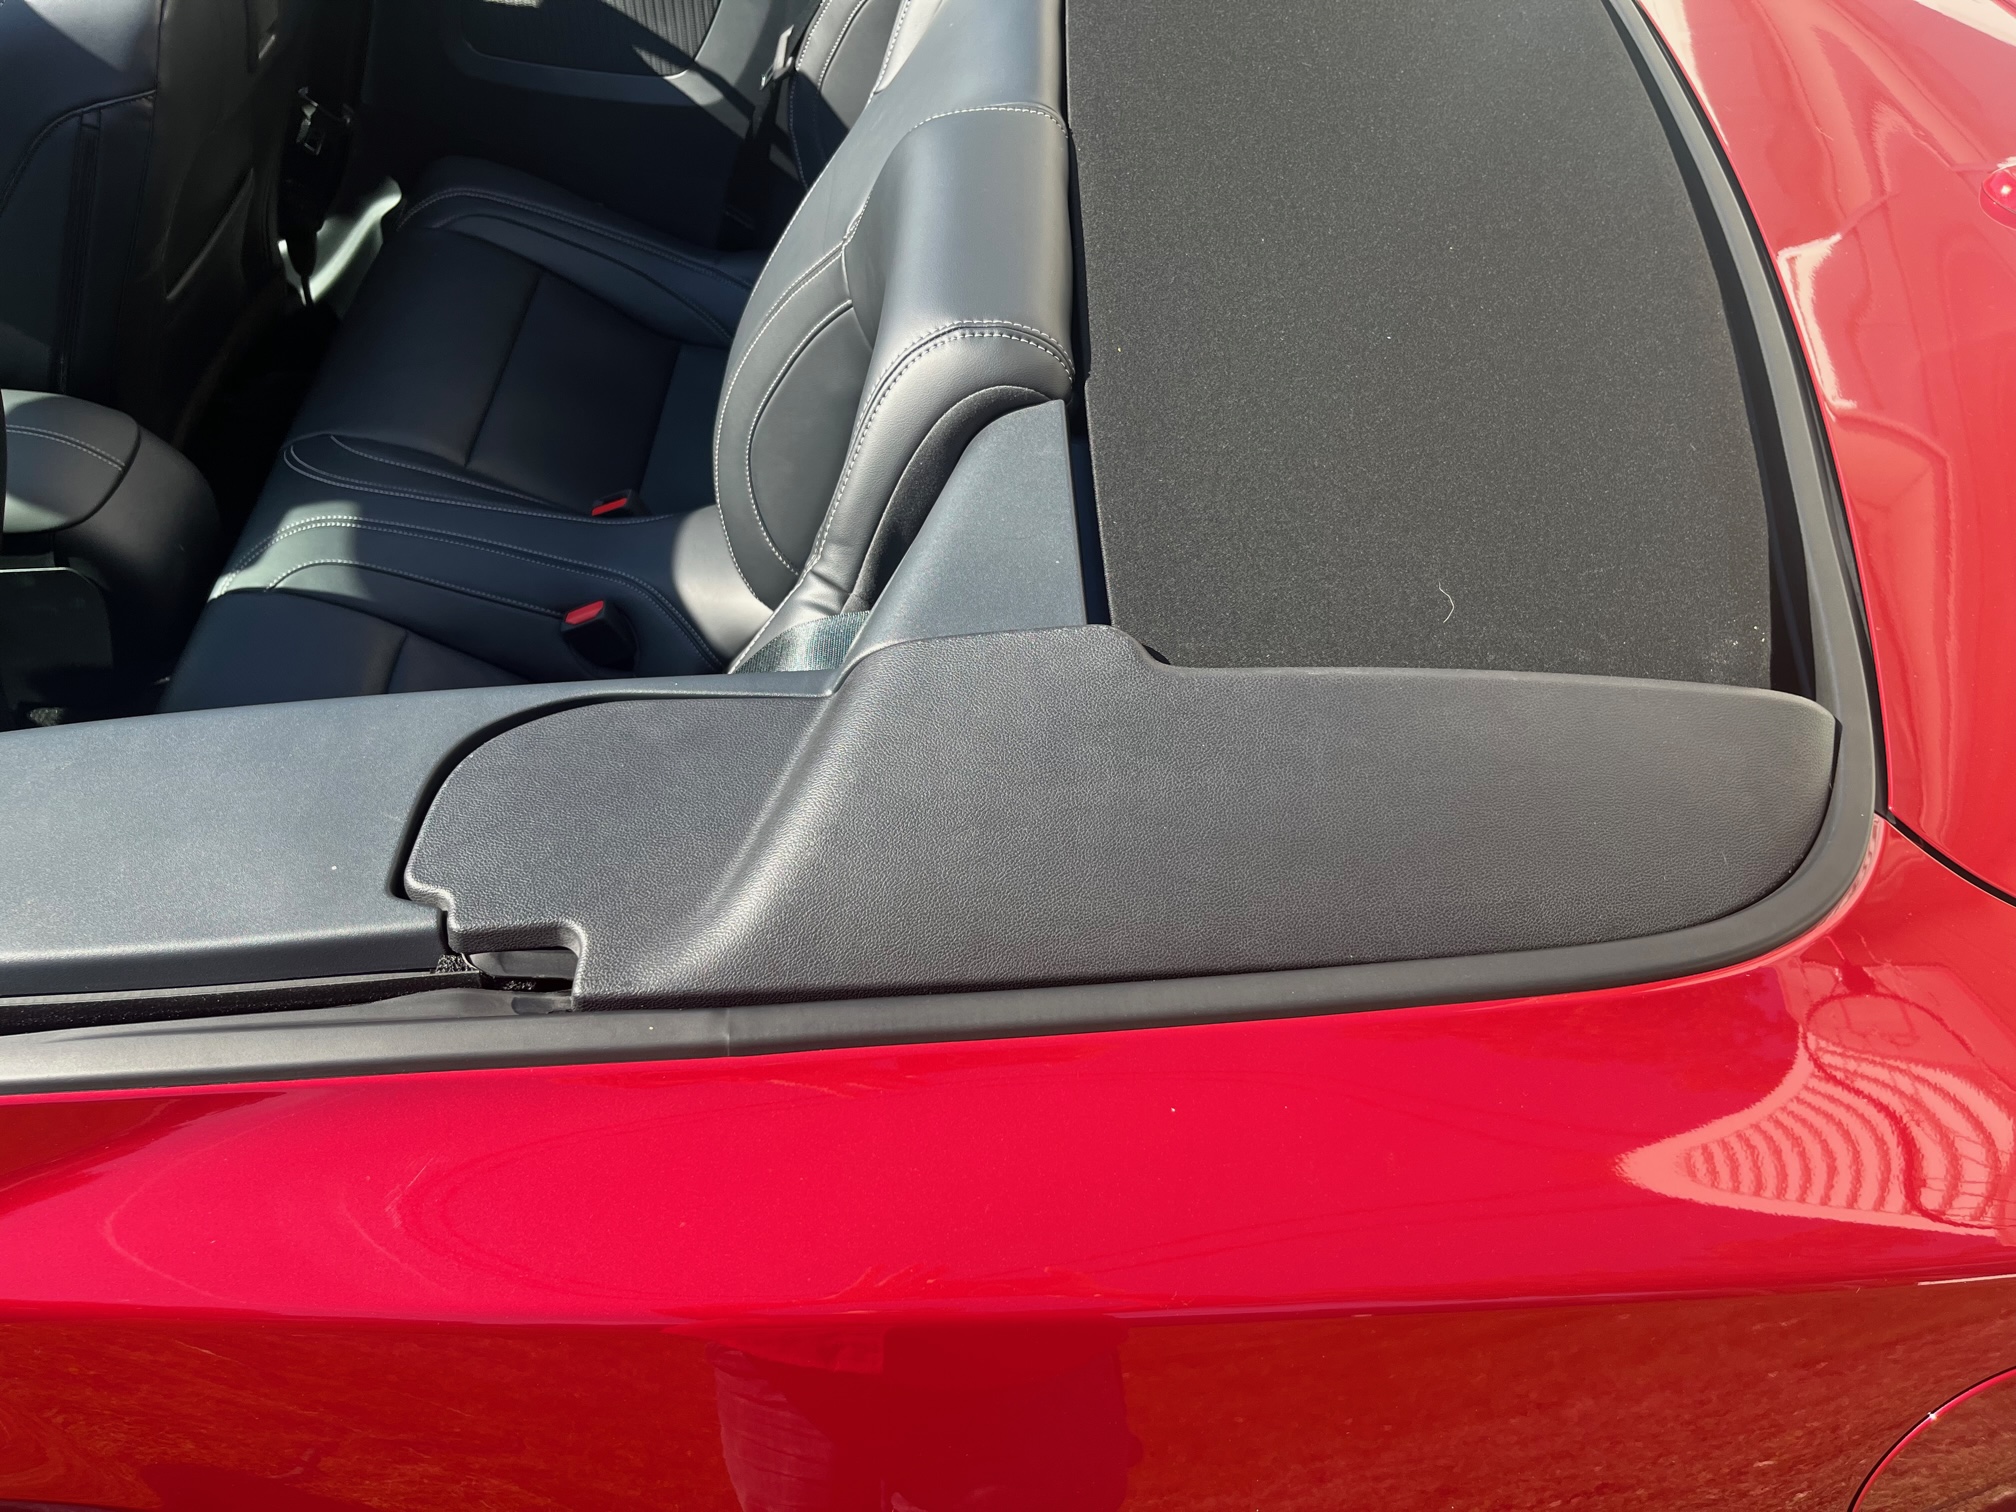 S650 Mustang Convertible plastic cover inserts img_9347-